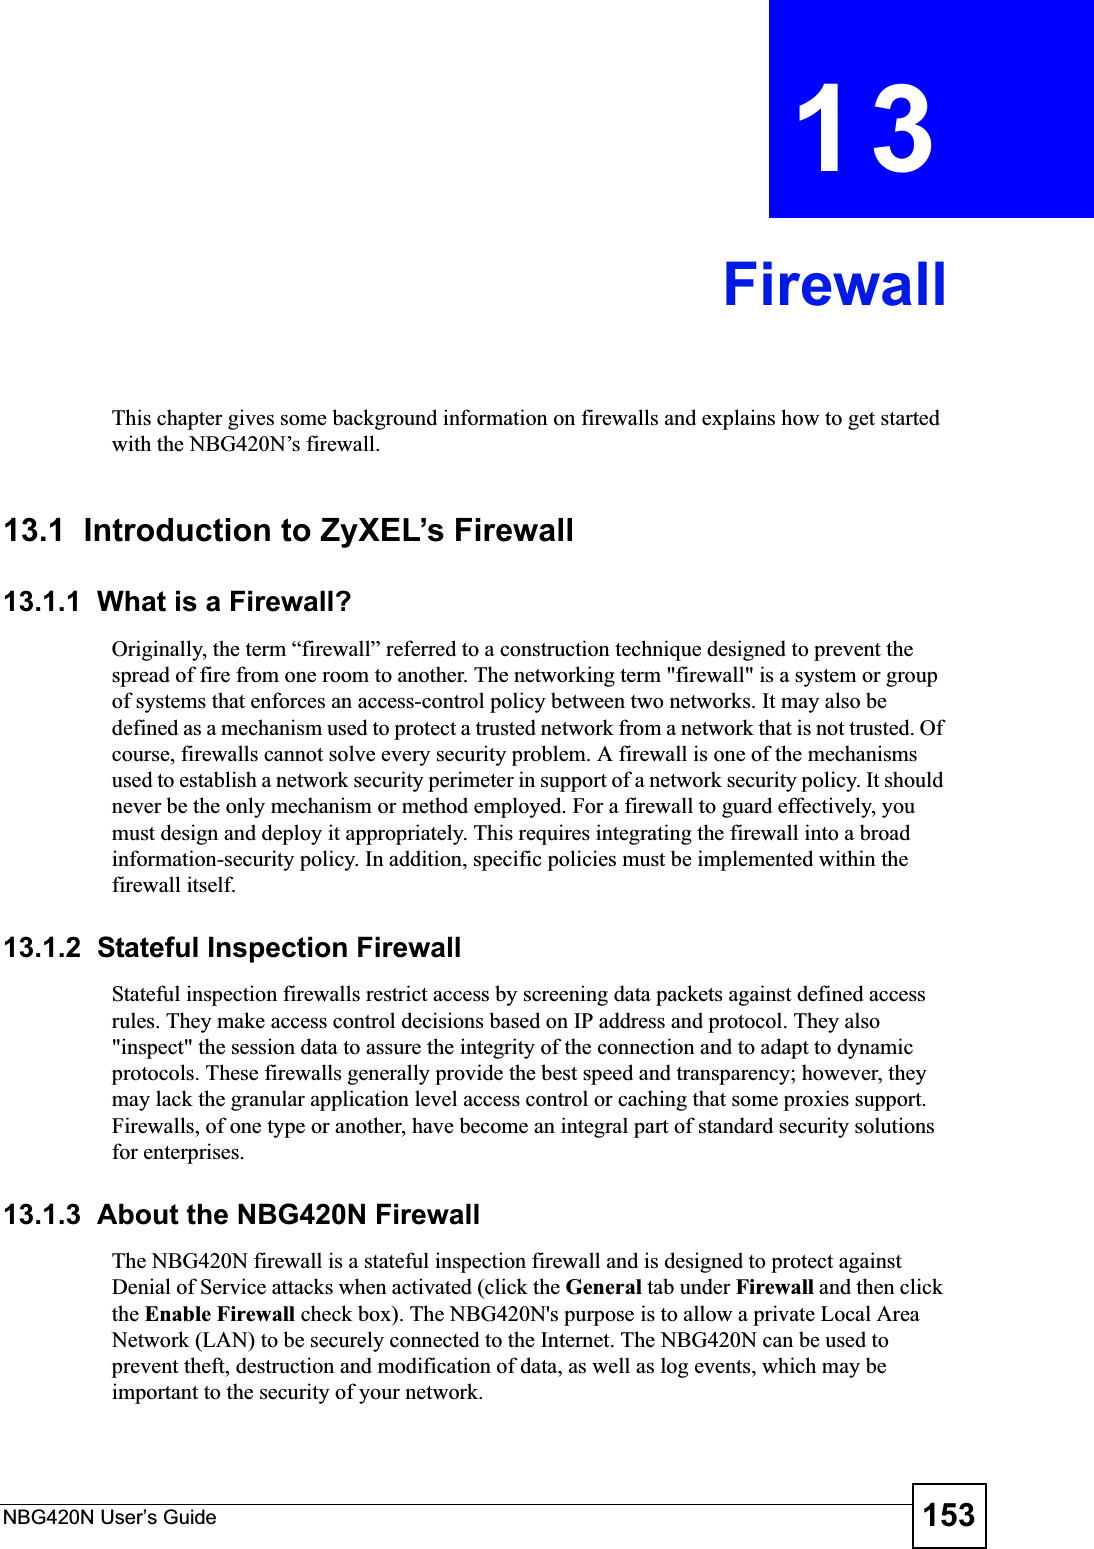 NBG420N User’s Guide 153CHAPTER 13FirewallThis chapter gives some background information on firewalls and explains how to get started with the NBG420N’s firewall.13.1  Introduction to ZyXEL’s Firewall   13.1.1  What is a Firewall?Originally, the term “firewall” referred to a construction technique designed to prevent the spread of fire from one room to another. The networking term &quot;firewall&quot; is a system or group of systems that enforces an access-control policy between two networks. It may also be defined as a mechanism used to protect a trusted network from a network that is not trusted. Of course, firewalls cannot solve every security problem. A firewall is one of the mechanisms used to establish a network security perimeter in support of a network security policy. It should never be the only mechanism or method employed. For a firewall to guard effectively, you must design and deploy it appropriately. This requires integrating the firewall into a broad information-security policy. In addition, specific policies must be implemented within the firewall itself. 13.1.2  Stateful Inspection Firewall Stateful inspection firewalls restrict access by screening data packets against defined access rules. They make access control decisions based on IP address and protocol. They also &quot;inspect&quot; the session data to assure the integrity of the connection and to adapt to dynamic protocols. These firewalls generally provide the best speed and transparency; however, they may lack the granular application level access control or caching that some proxies support. Firewalls, of one type or another, have become an integral part of standard security solutions for enterprises.13.1.3  About the NBG420N FirewallThe NBG420N firewall is a stateful inspection firewall and is designed to protect against Denial of Service attacks when activated (click the General tab under Firewall and then click the Enable Firewall check box). The NBG420N&apos;s purpose is to allow a private Local Area Network (LAN) to be securely connected to the Internet. The NBG420N can be used to prevent theft, destruction and modification of data, as well as log events, which may be important to the security of your network. 